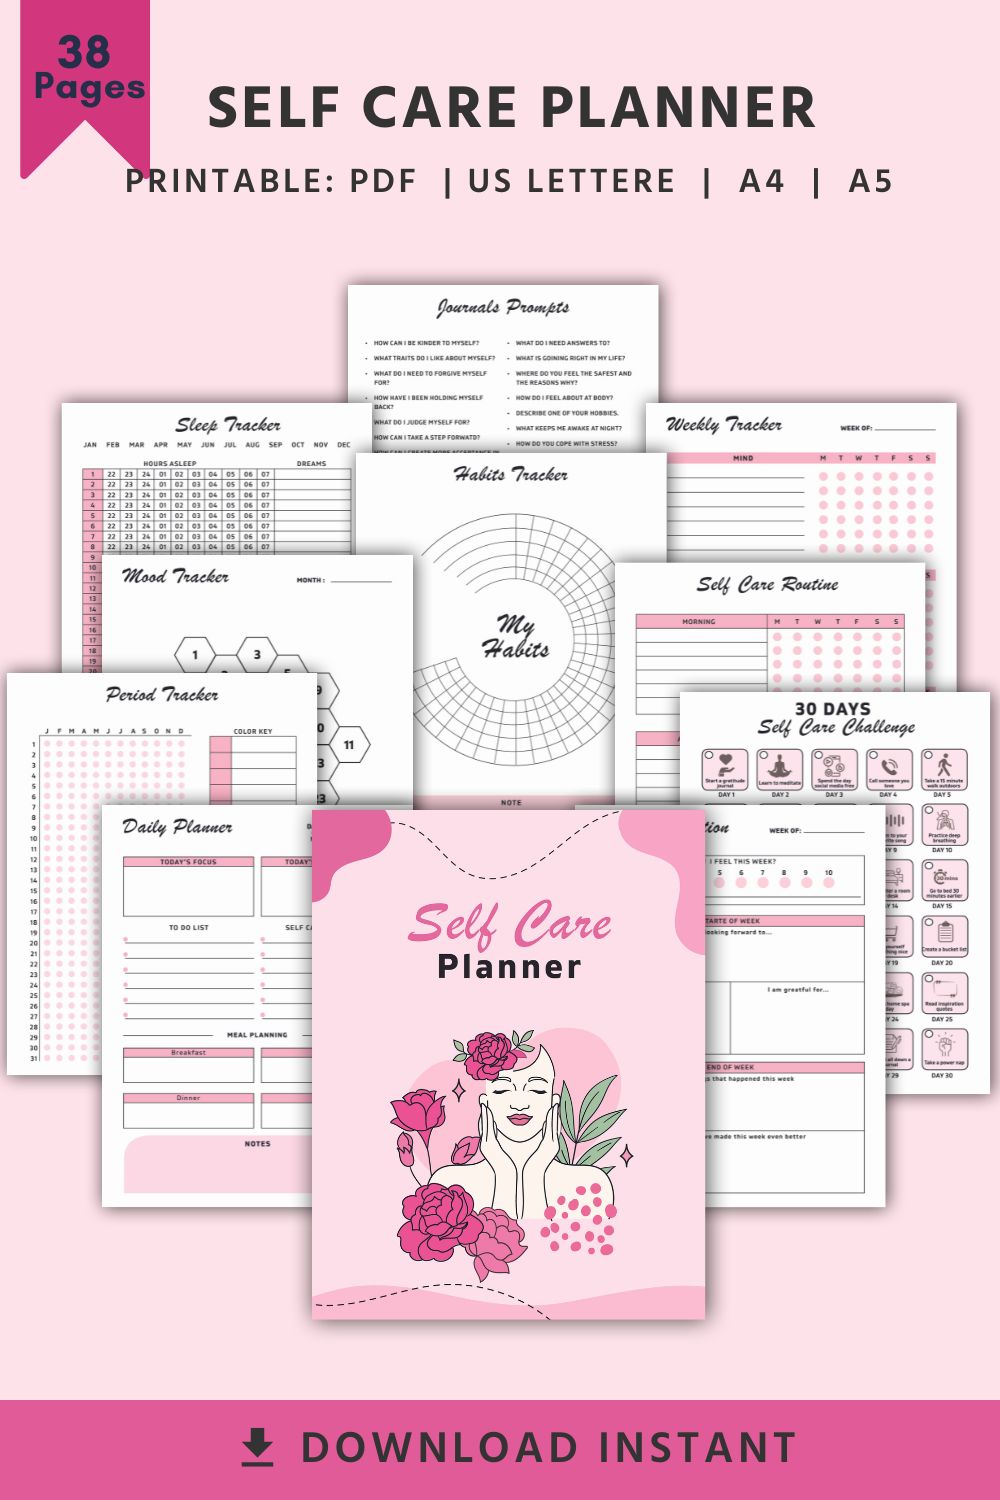 Self Care Planner pinterest preview image.